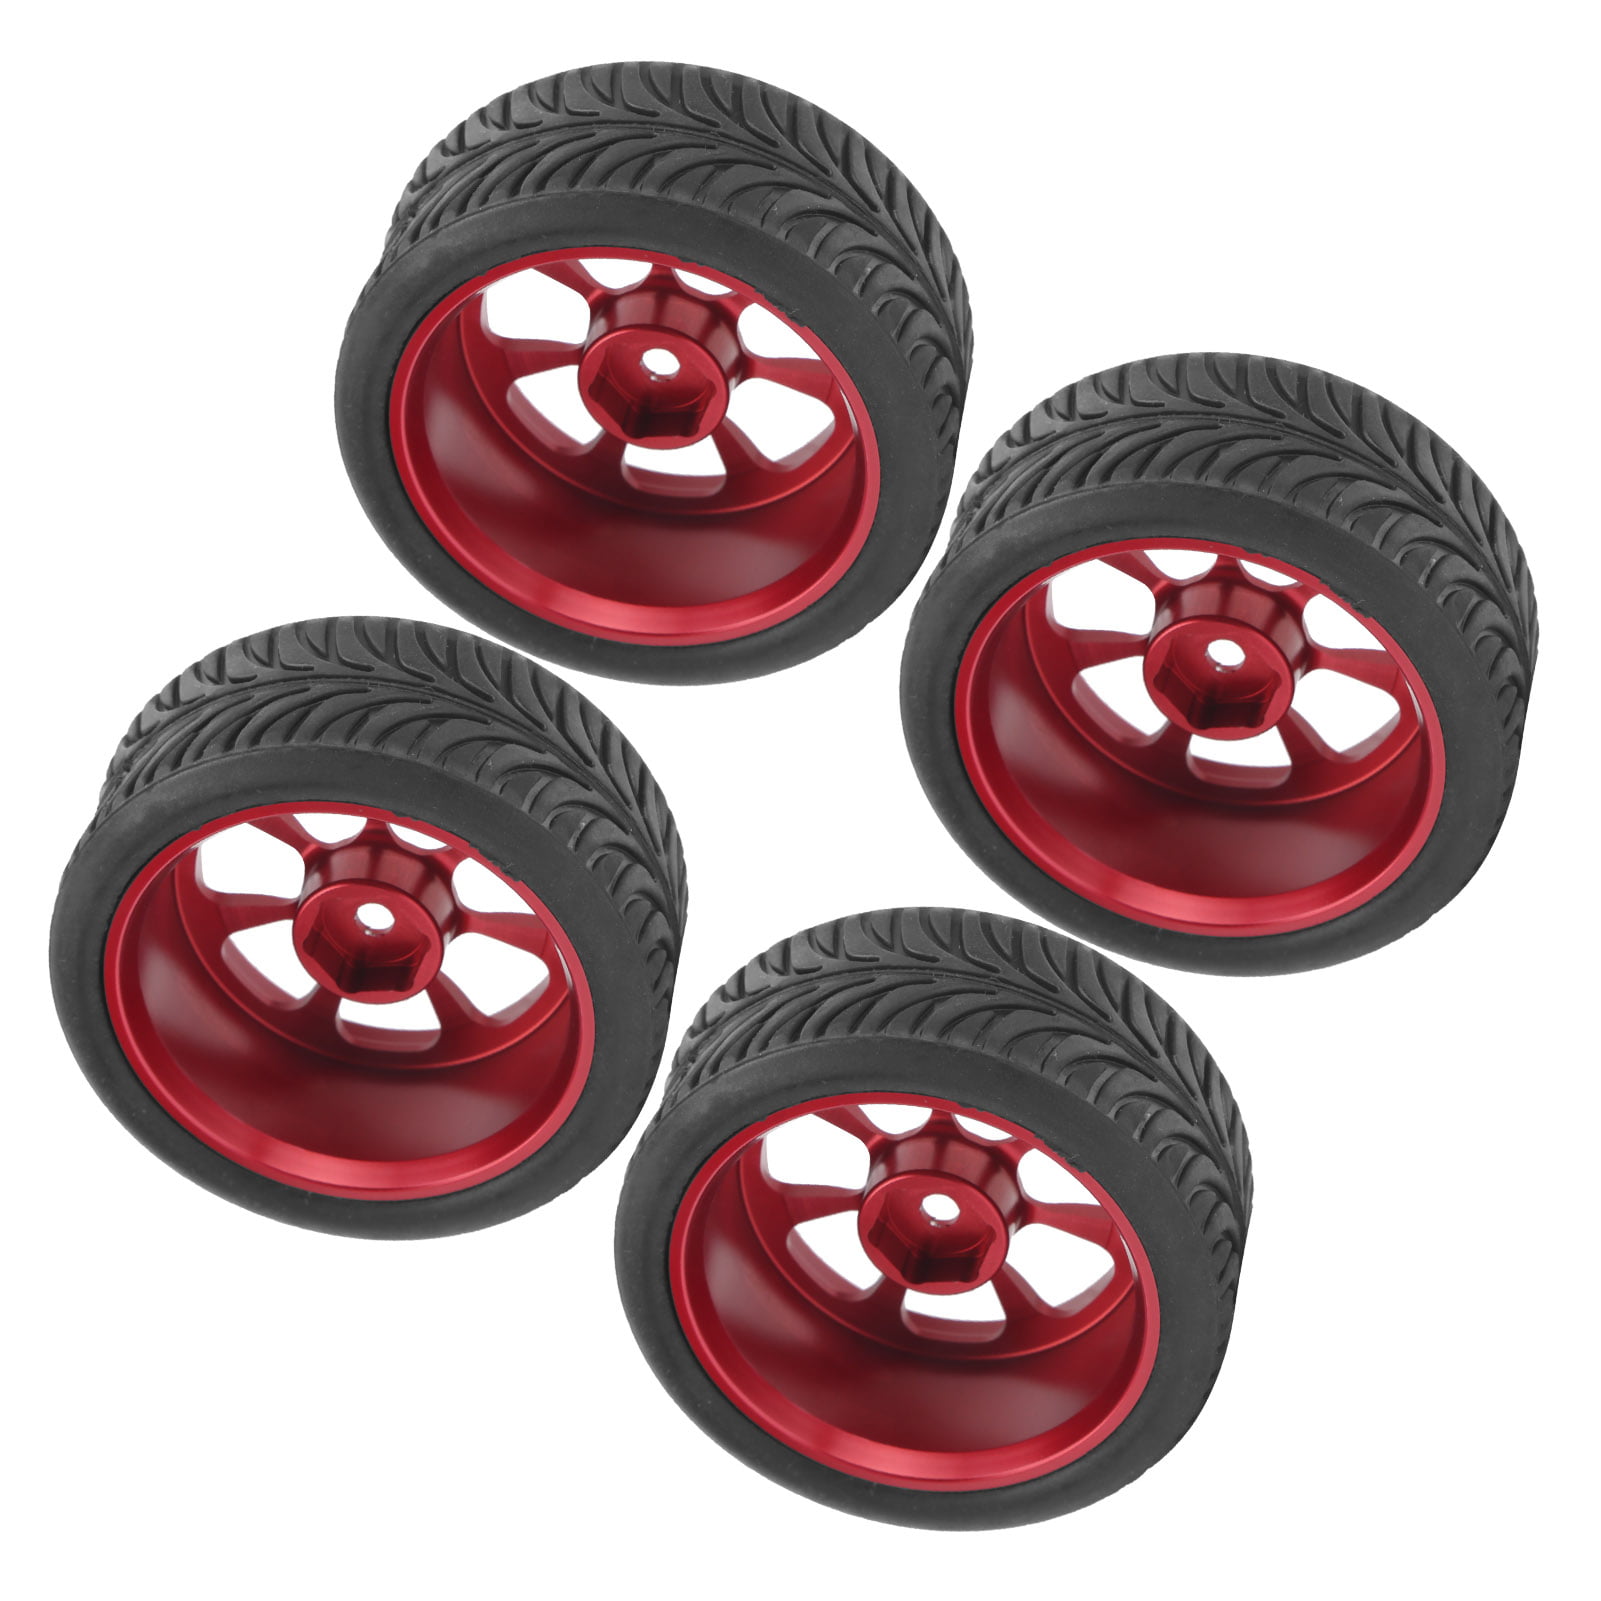 4pcs 2.5 Inch RC Wheels and Tires Tyres Accessories for Wltoys A979 Series 1/18 